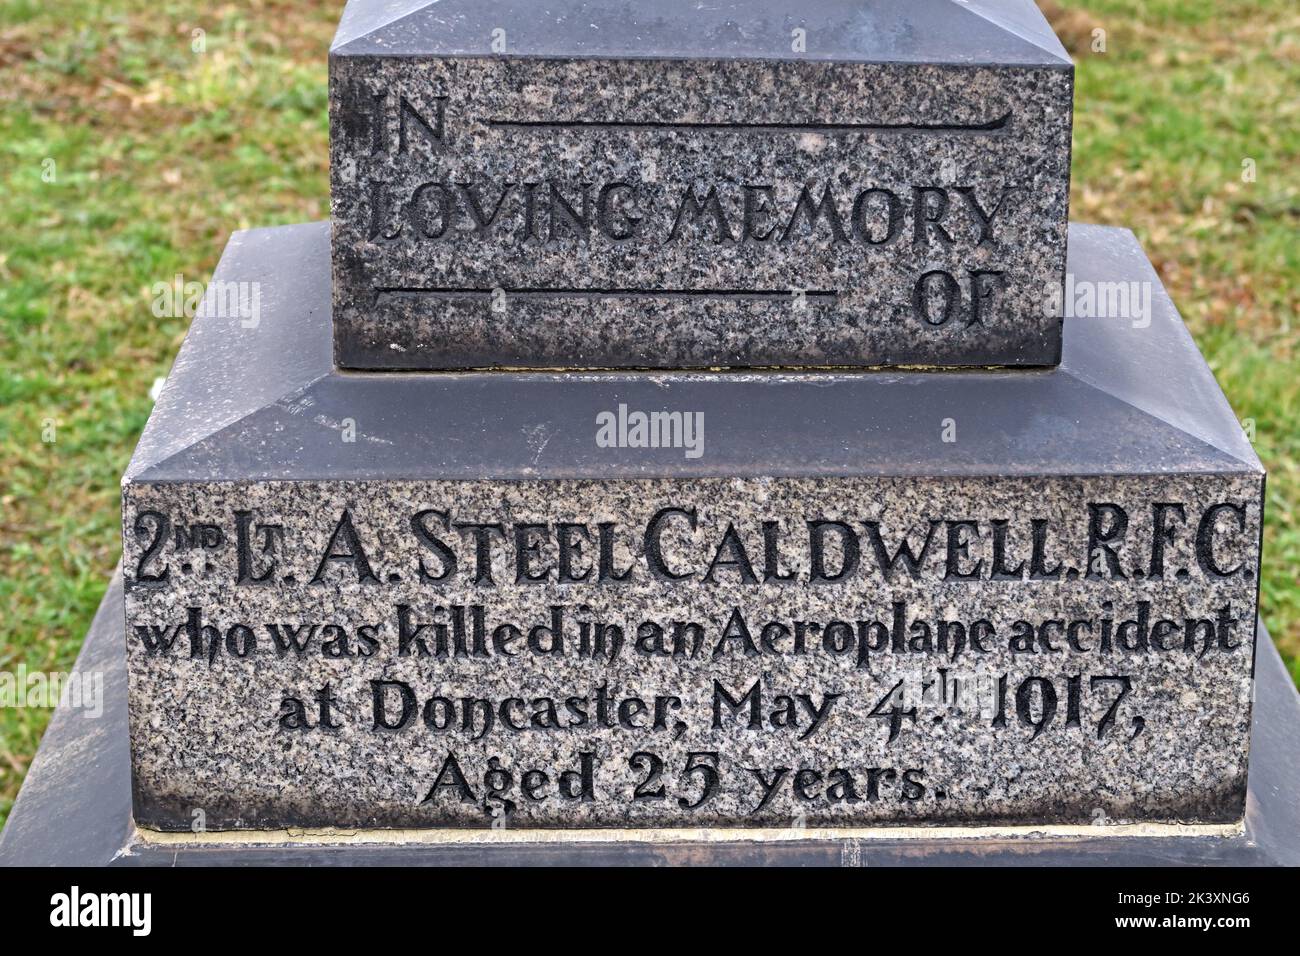 Gravestone, In loving memory of 2nd Lt A Steel Caldwell RFC, who was killed in an aeroplane accident at Doncaster May 4th 1917 Stock Photo